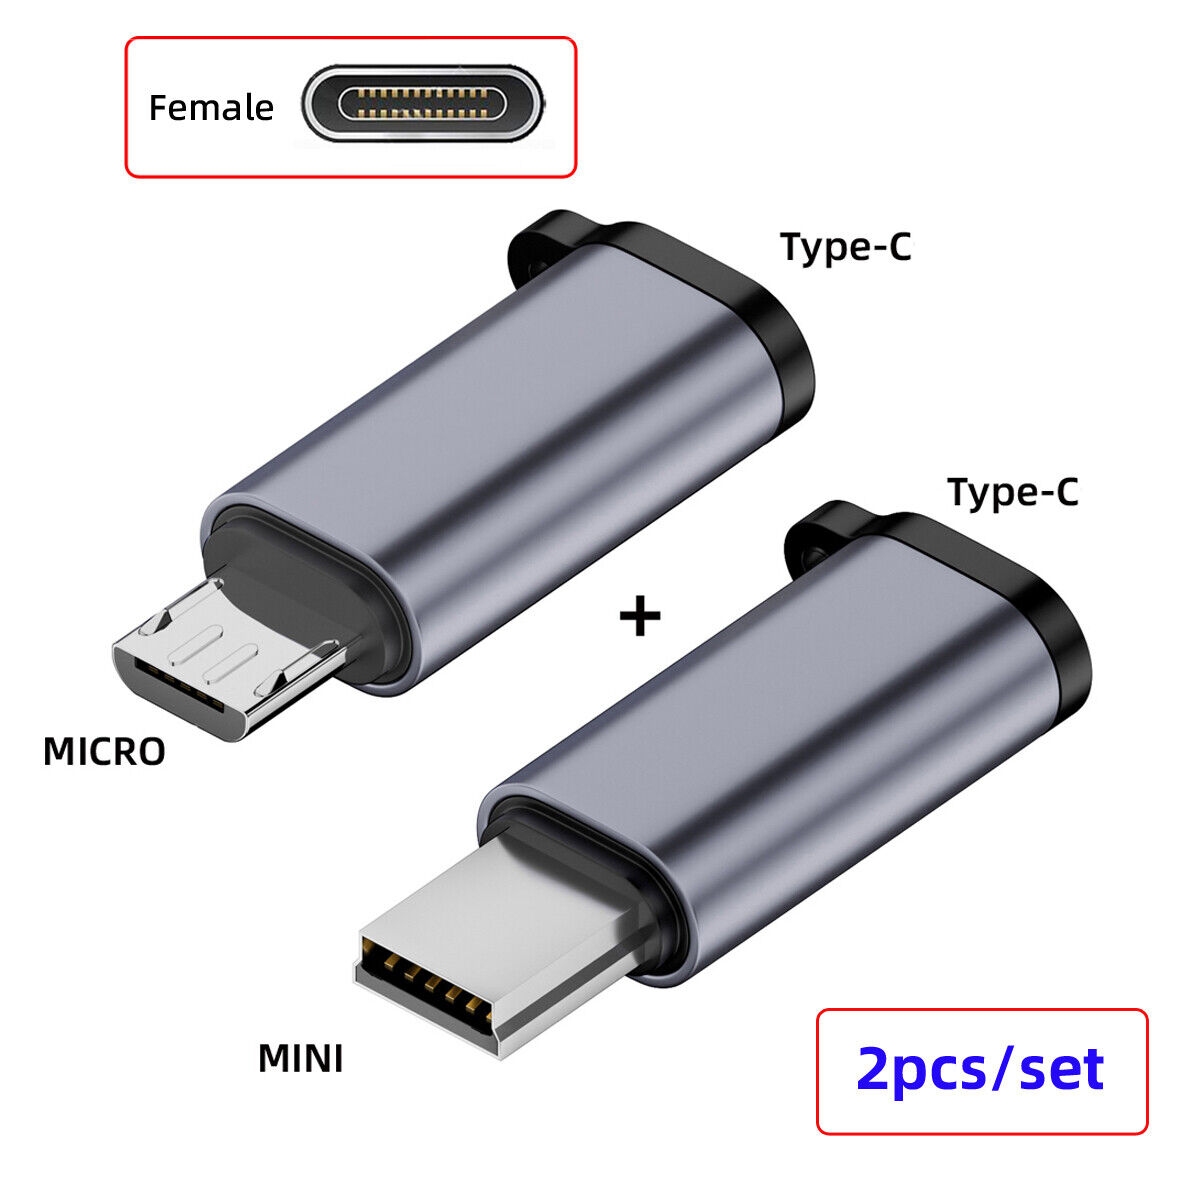 CY Type-C to Micro Mini USB 2pcs/lot USB2.0 Power Data Adapter with Chain Holes